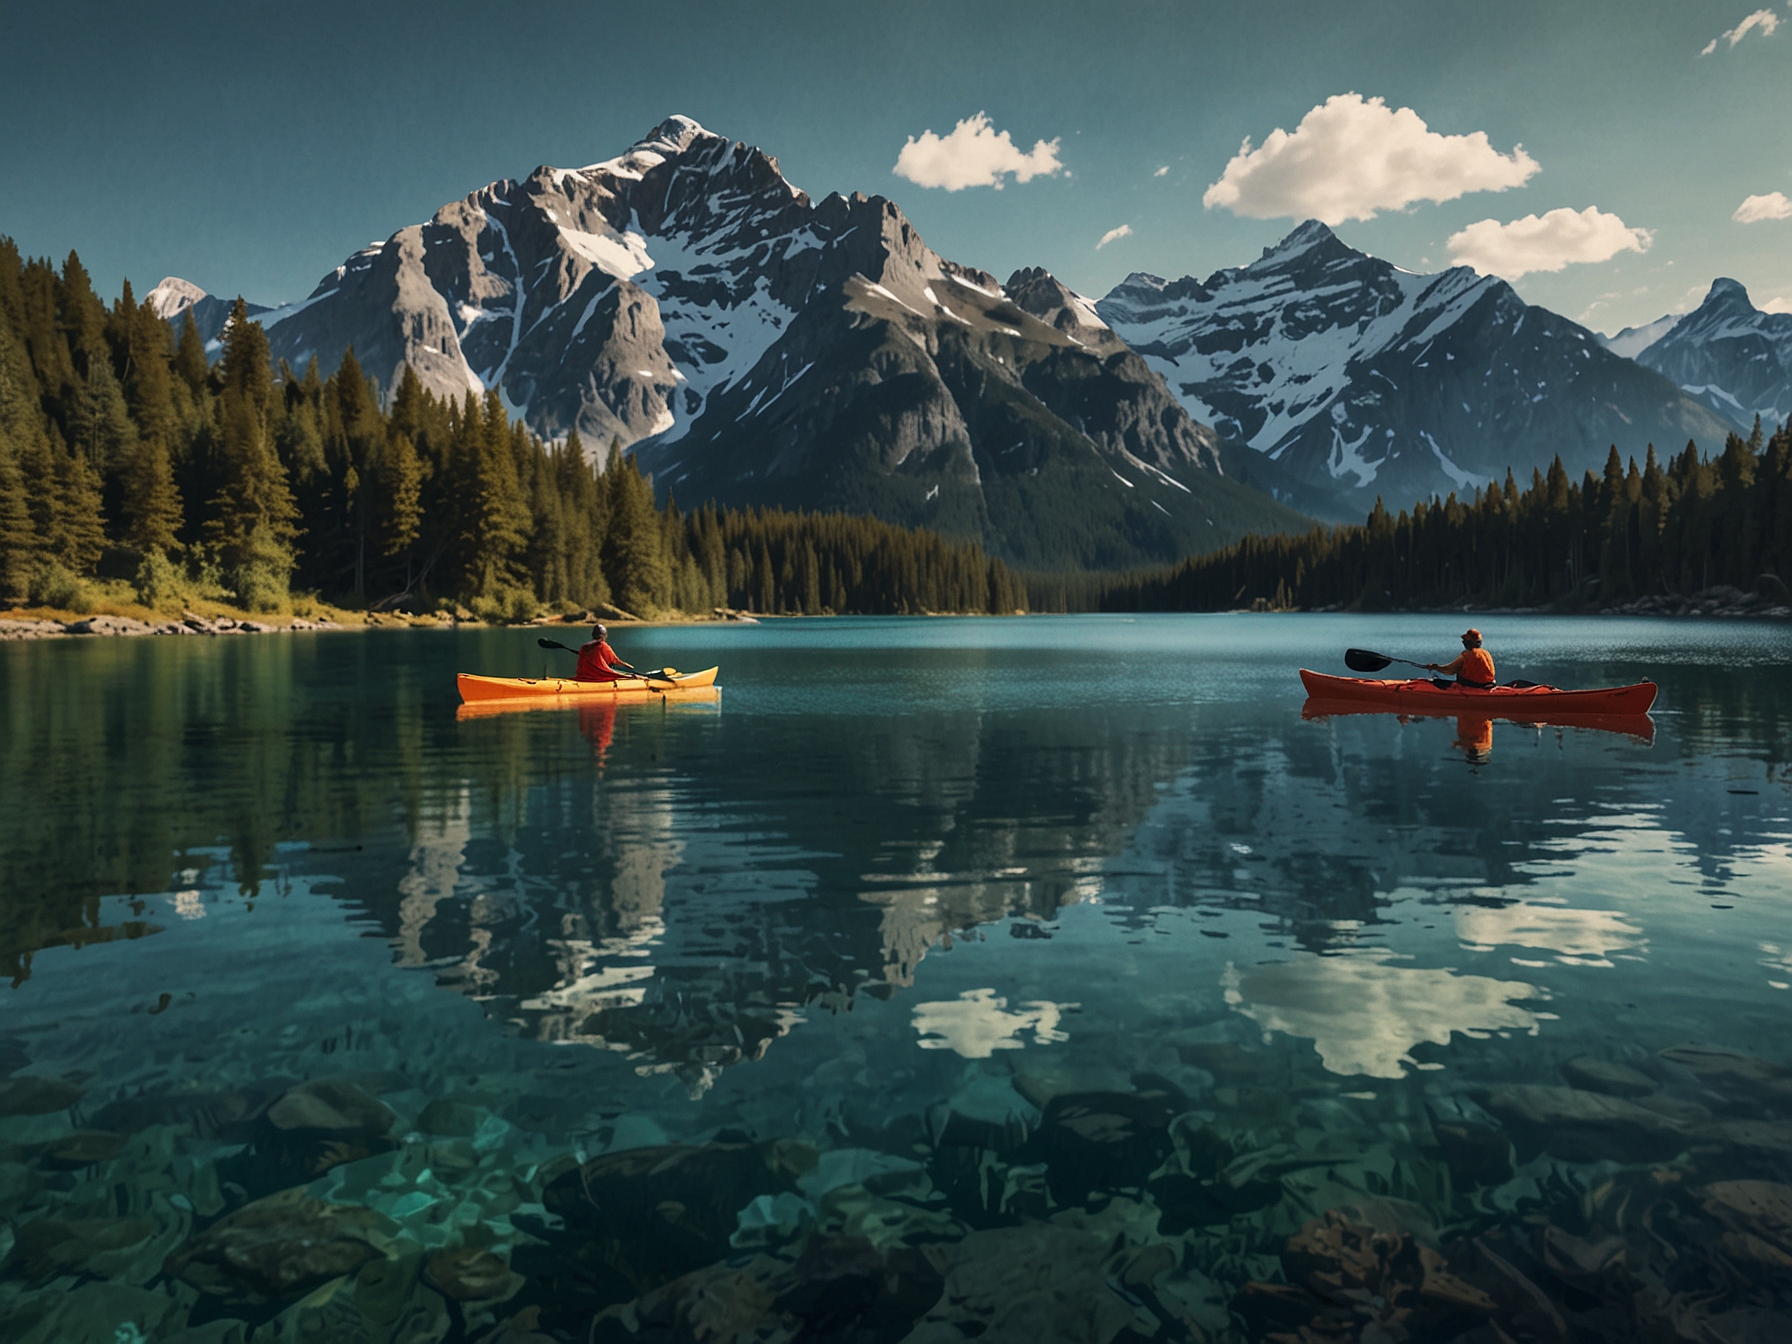 A panoramic view of Banff National Park in Canada, featuring kayakers on a crystal-clear lake surrounded by majestic mountain peaks. The image highlights the ideal outdoor adventure setting in pleasantly moderate temperatures.